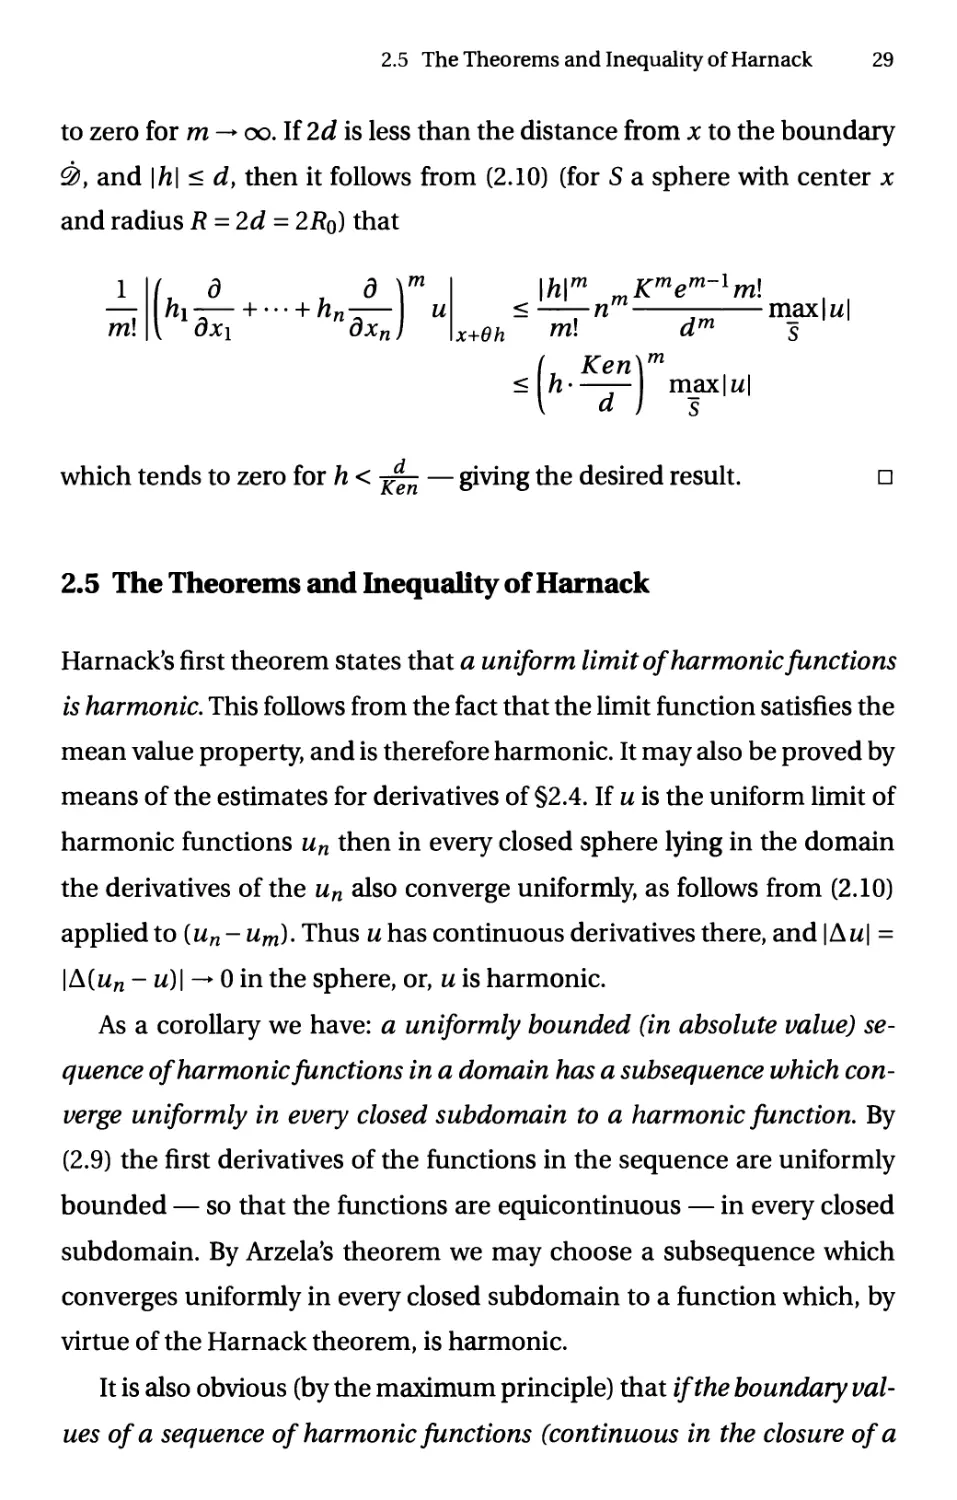 2.5 The Theorems and Inequality of Harnack